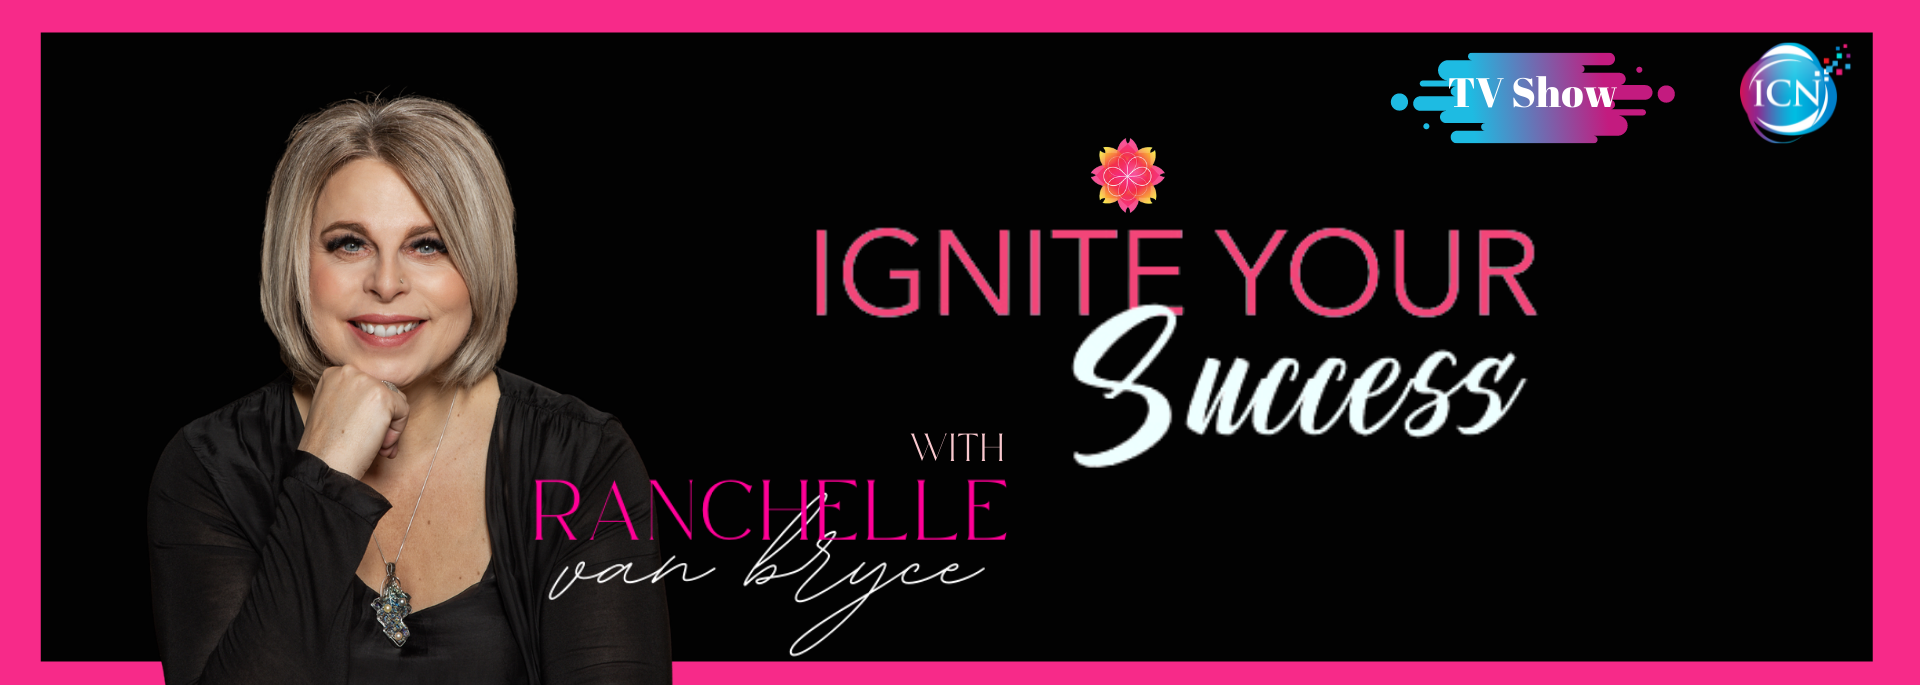 Ignite Your Success With Ranchelle Van Bryce channel